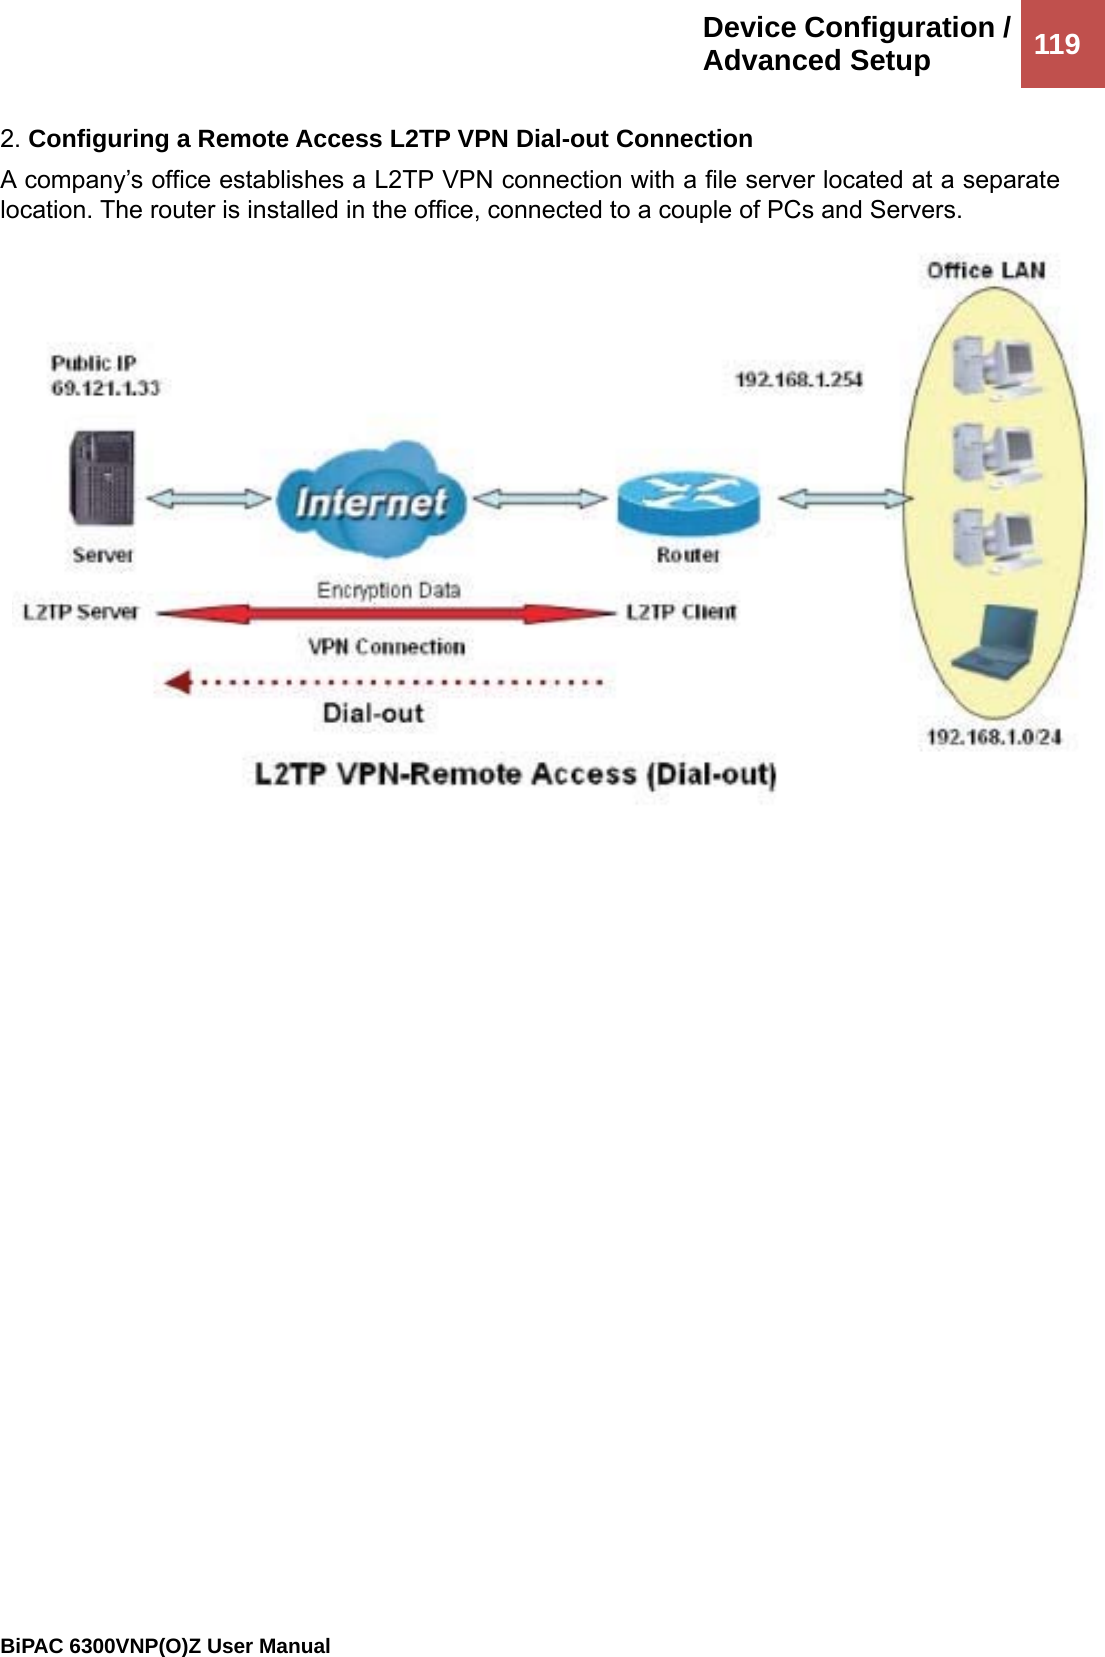 Device Configuration /Advanced Setup  119                                                BiPAC 6300VNP(O)Z User Manual  2. Configuring a Remote Access L2TP VPN Dial-out Connection A company’s office establishes a L2TP VPN connection with a file server located at a separate location. The router is installed in the office, connected to a couple of PCs and Servers.  